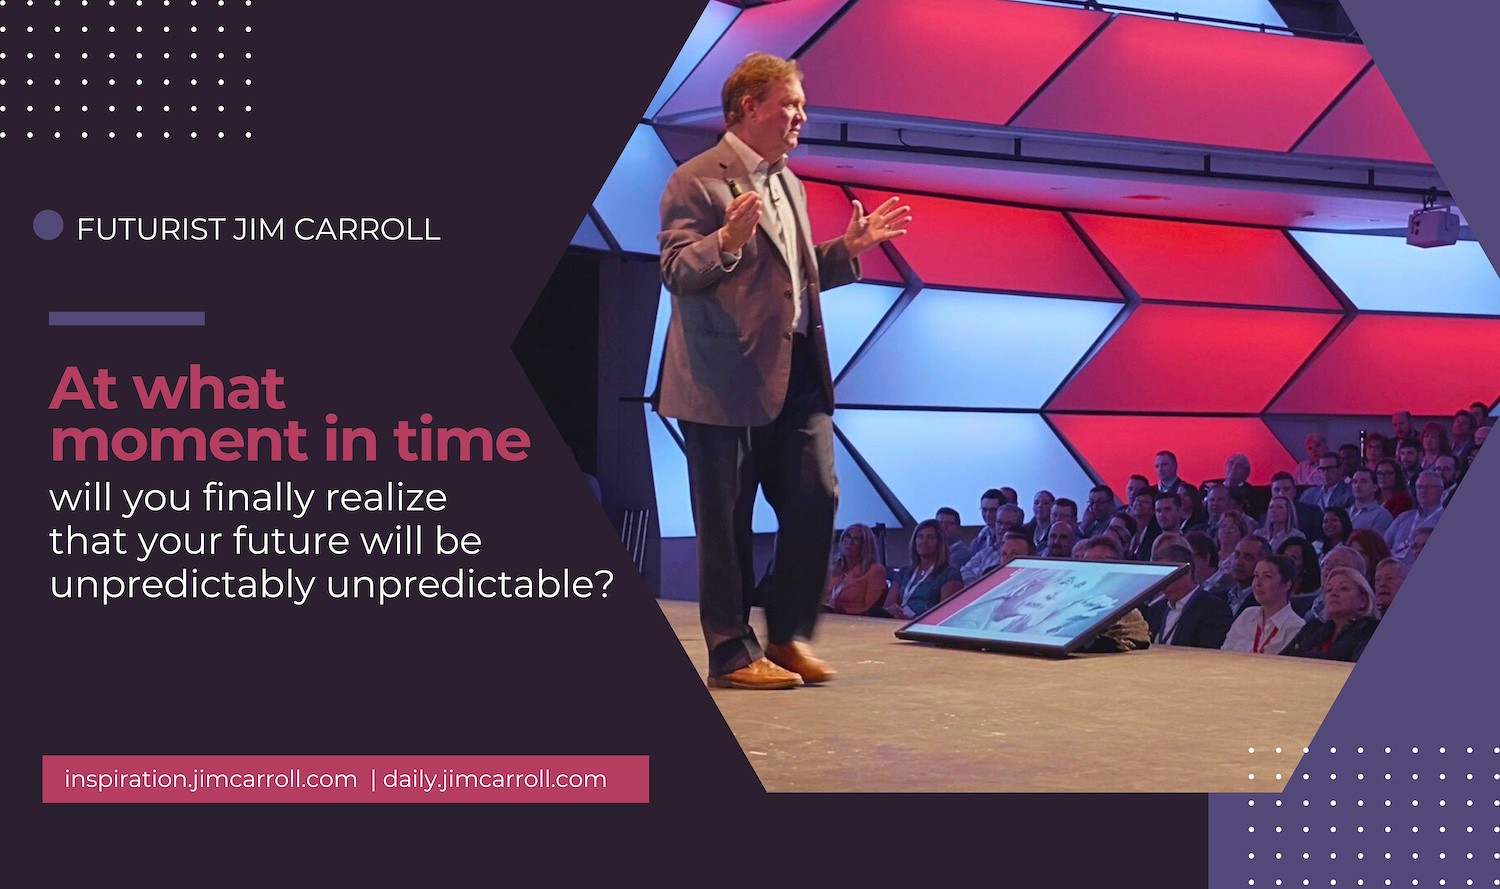 "At what moment will you finally realize that your future will be unpredictably unpredictable?" - Futurist Jim Carroll